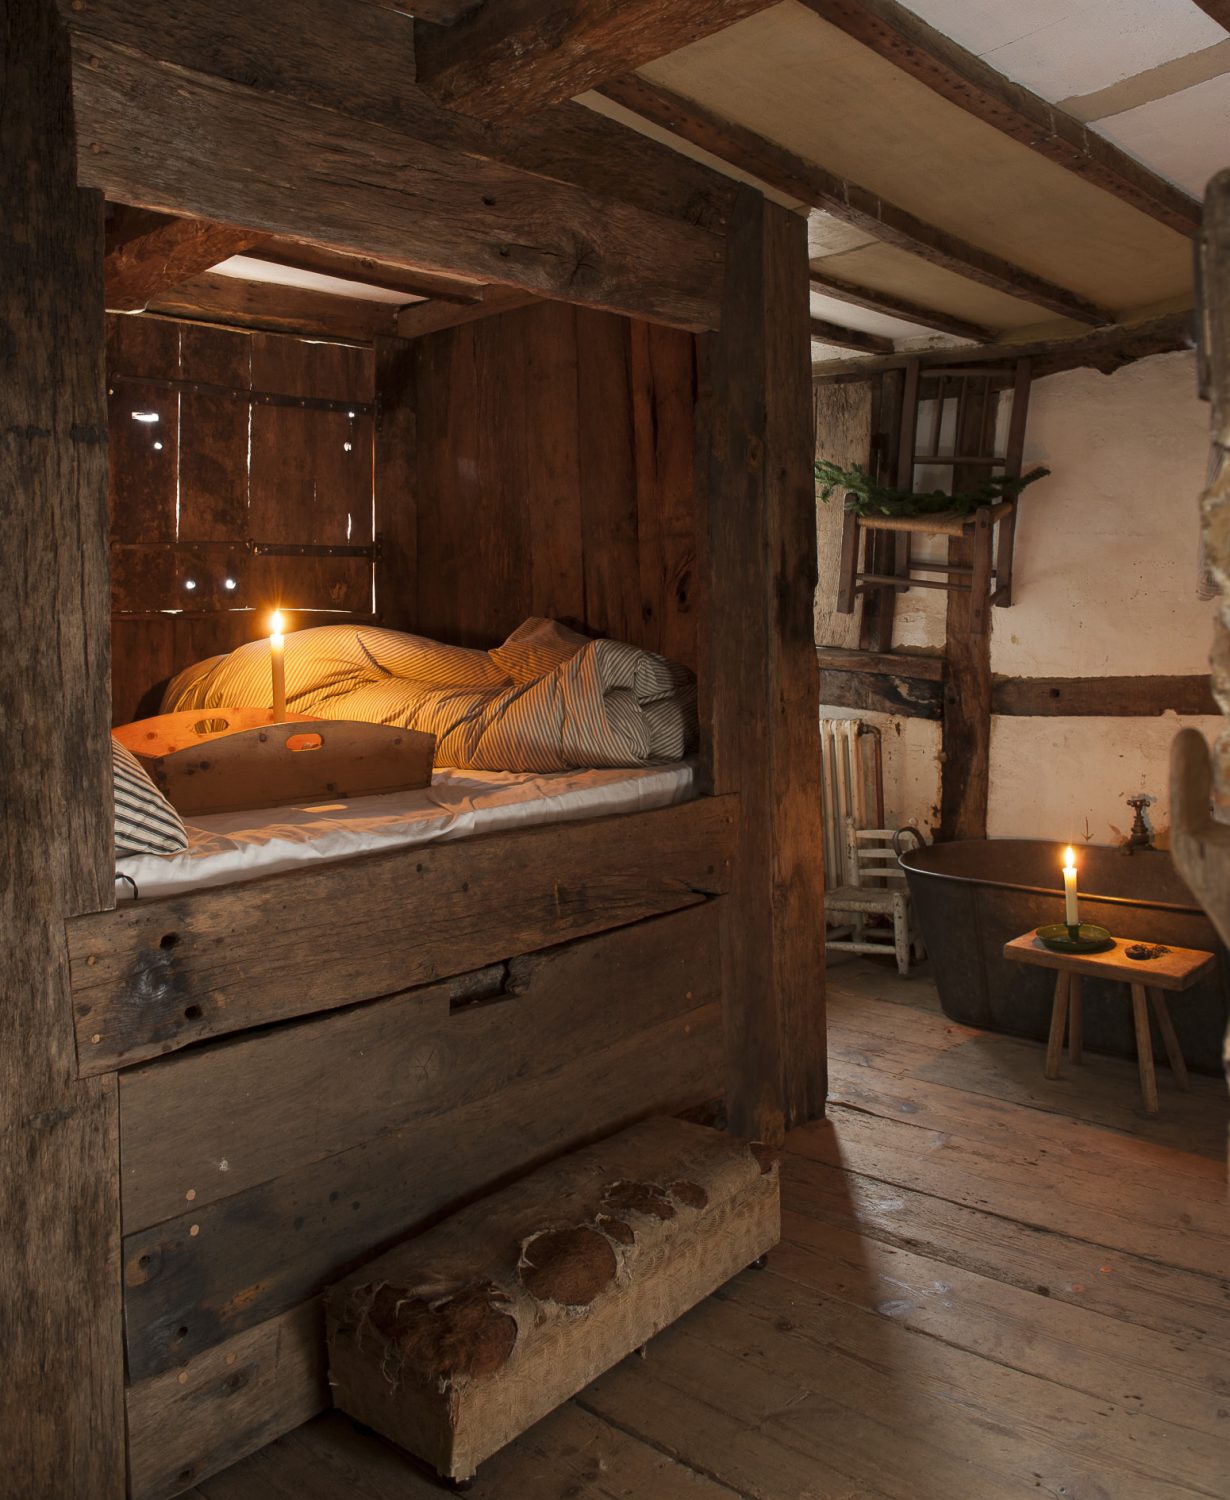 The main bedroom, with its Tudor ‘en suite’ is home to a raised bed enclosed by wood panelling and shutters